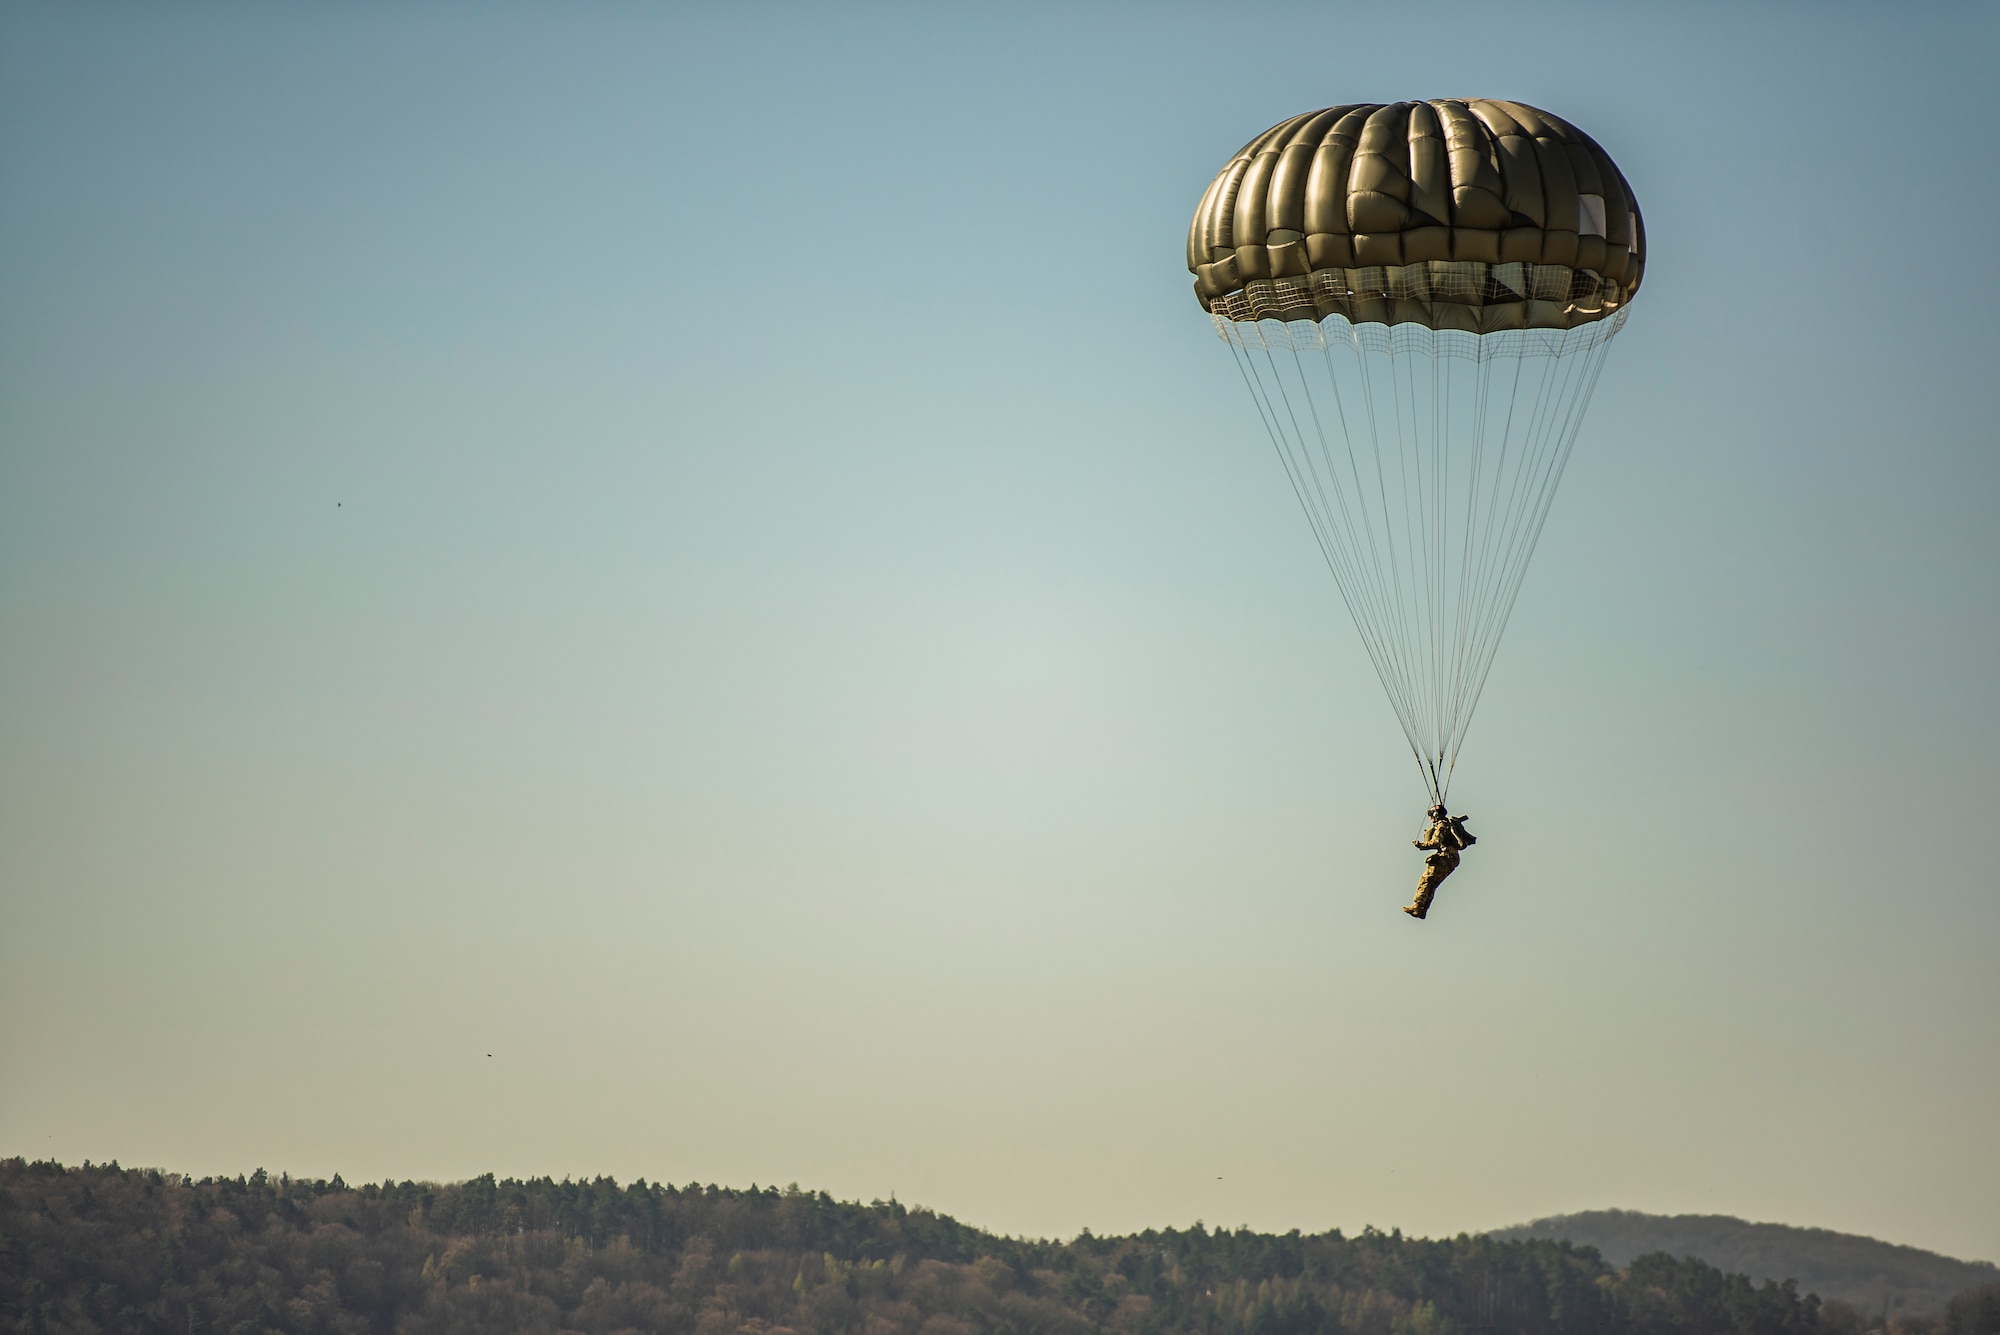 An airborne Airman controls decent of parachuting over the Germany skyline.